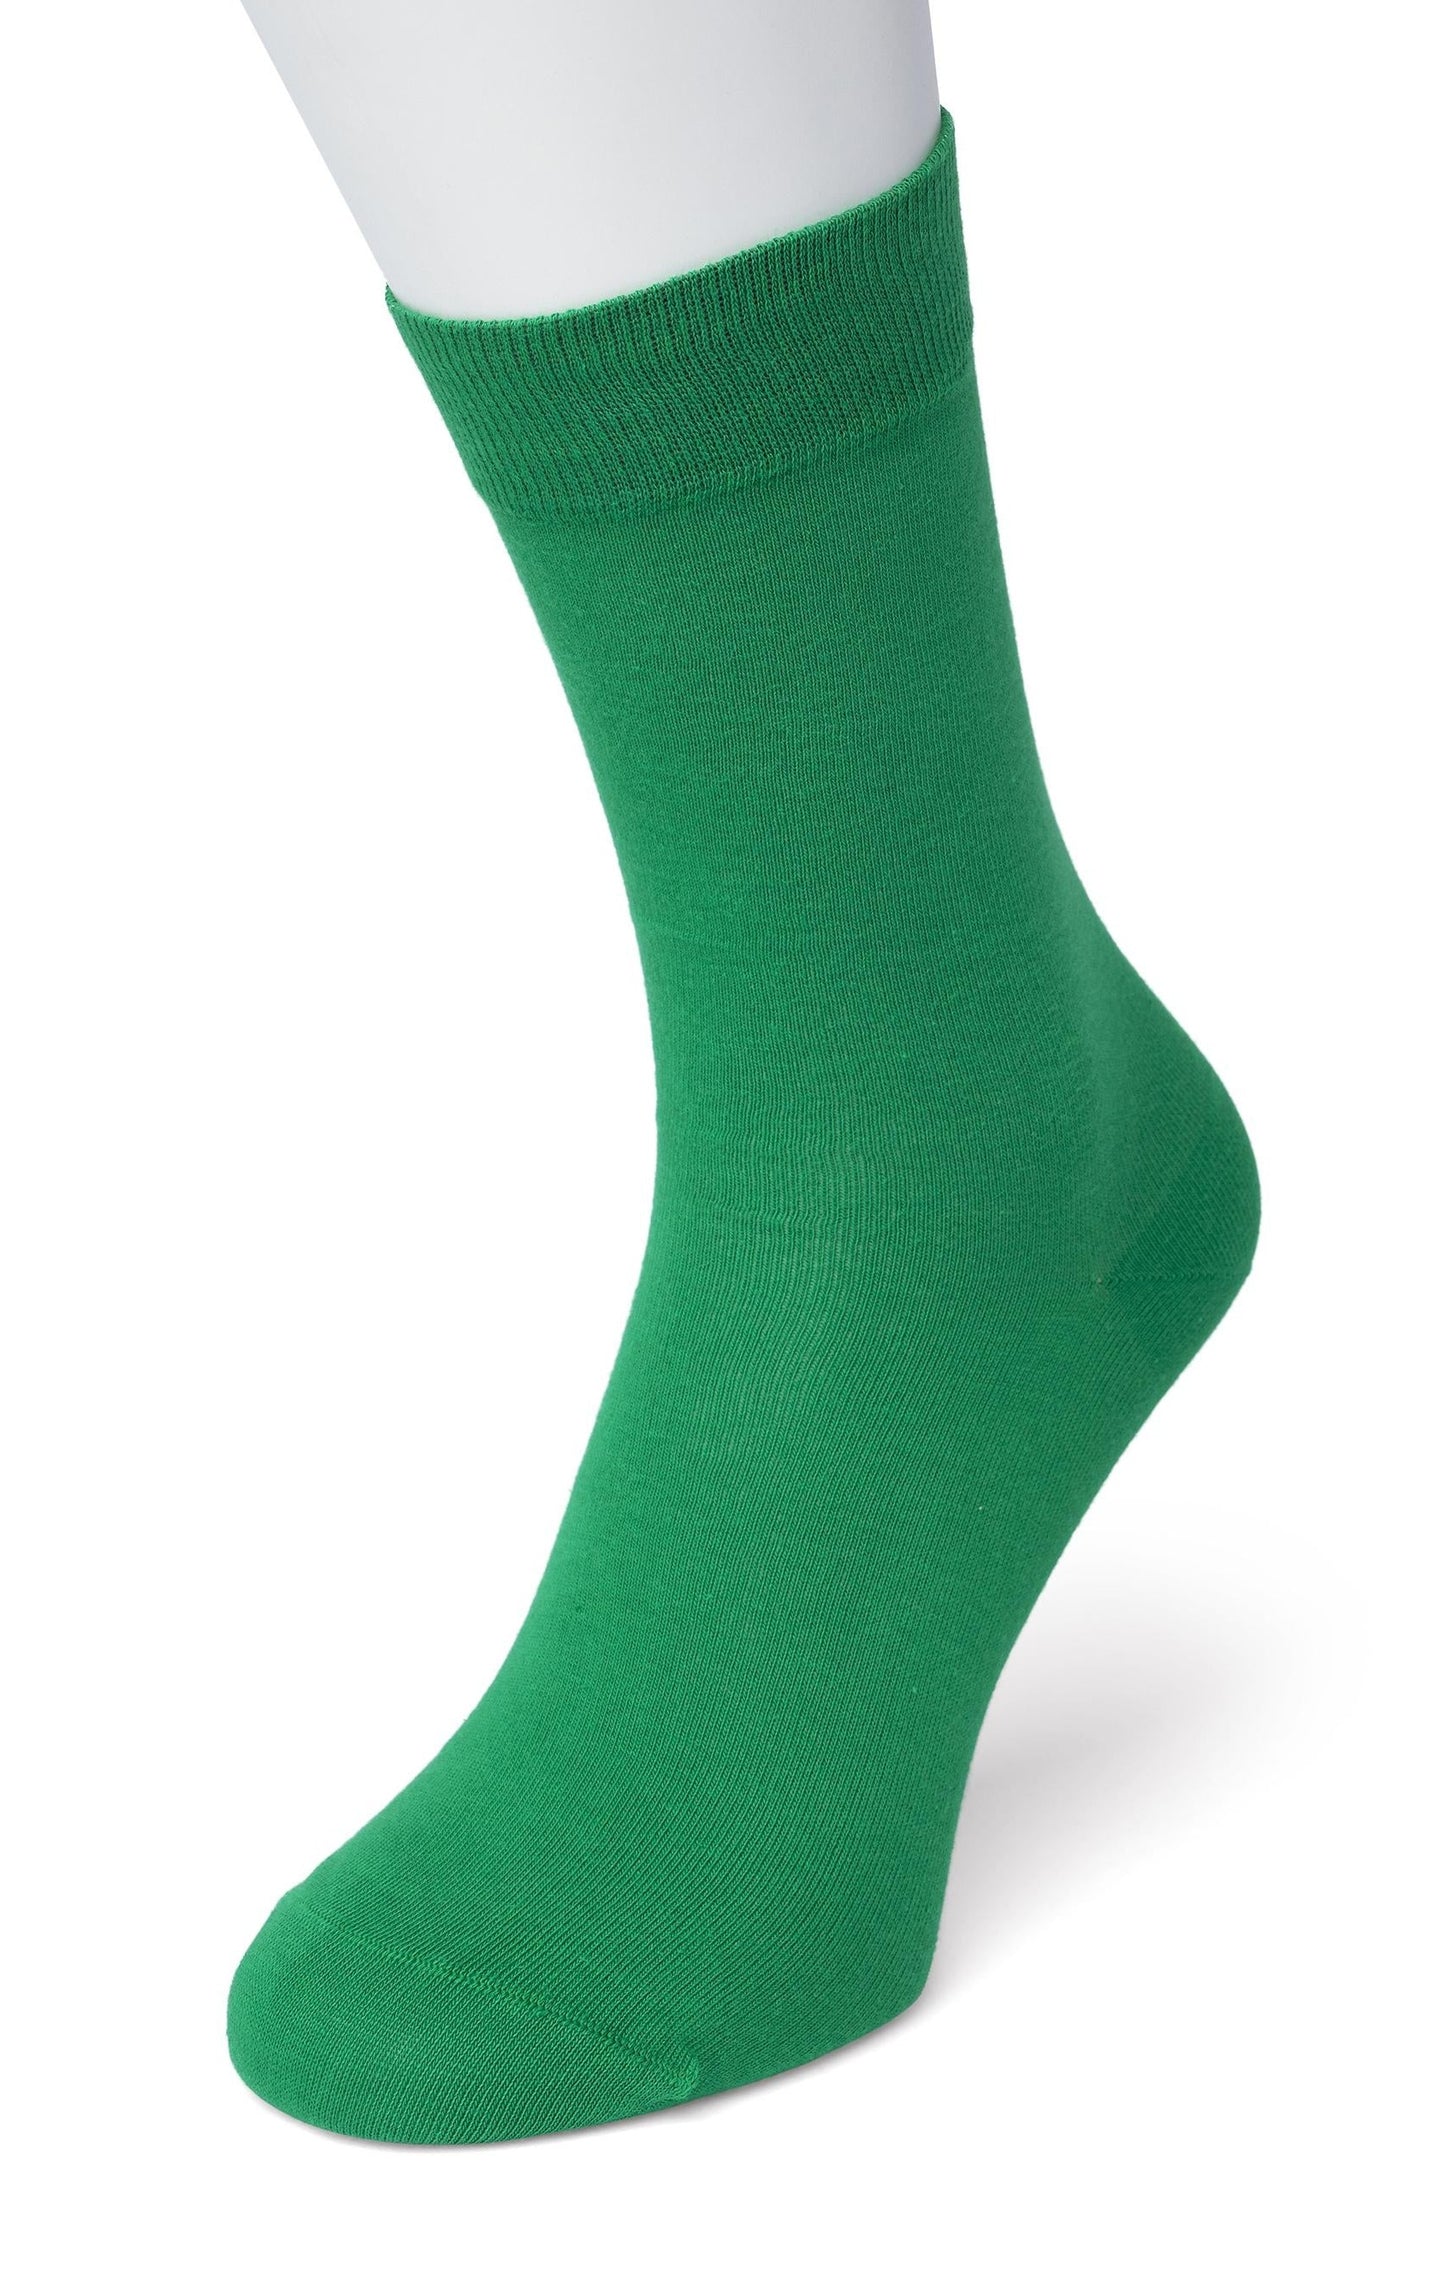 Bonnie Doon 83422 Cotton Sock - Emerald green ankle socks available in women sizes